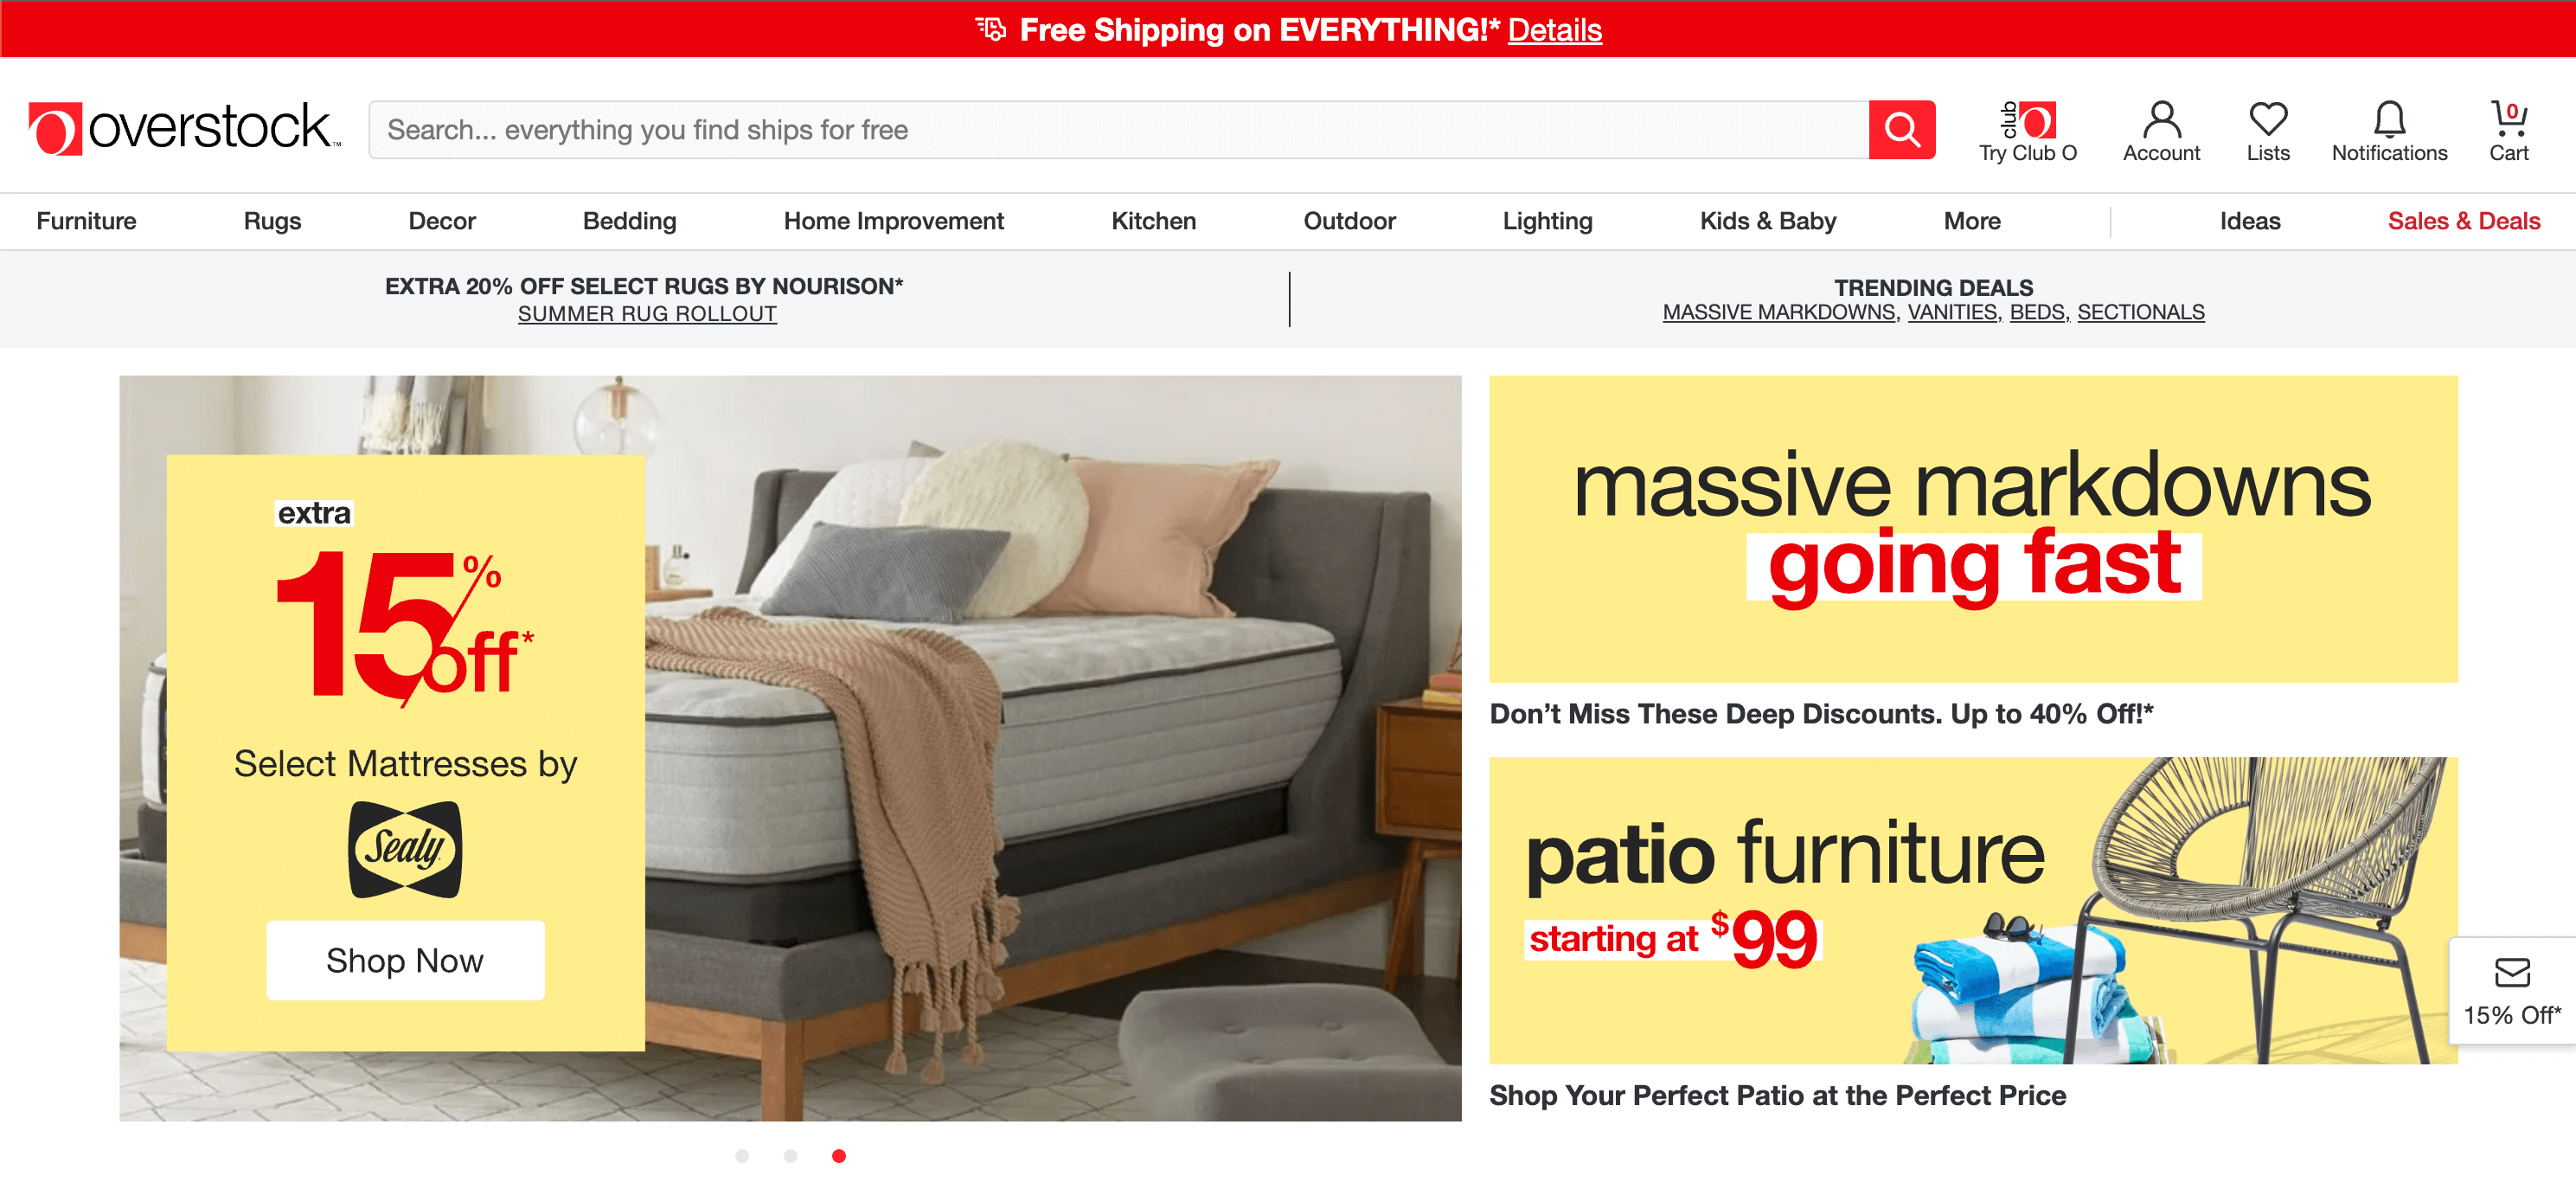 Overstock's home page